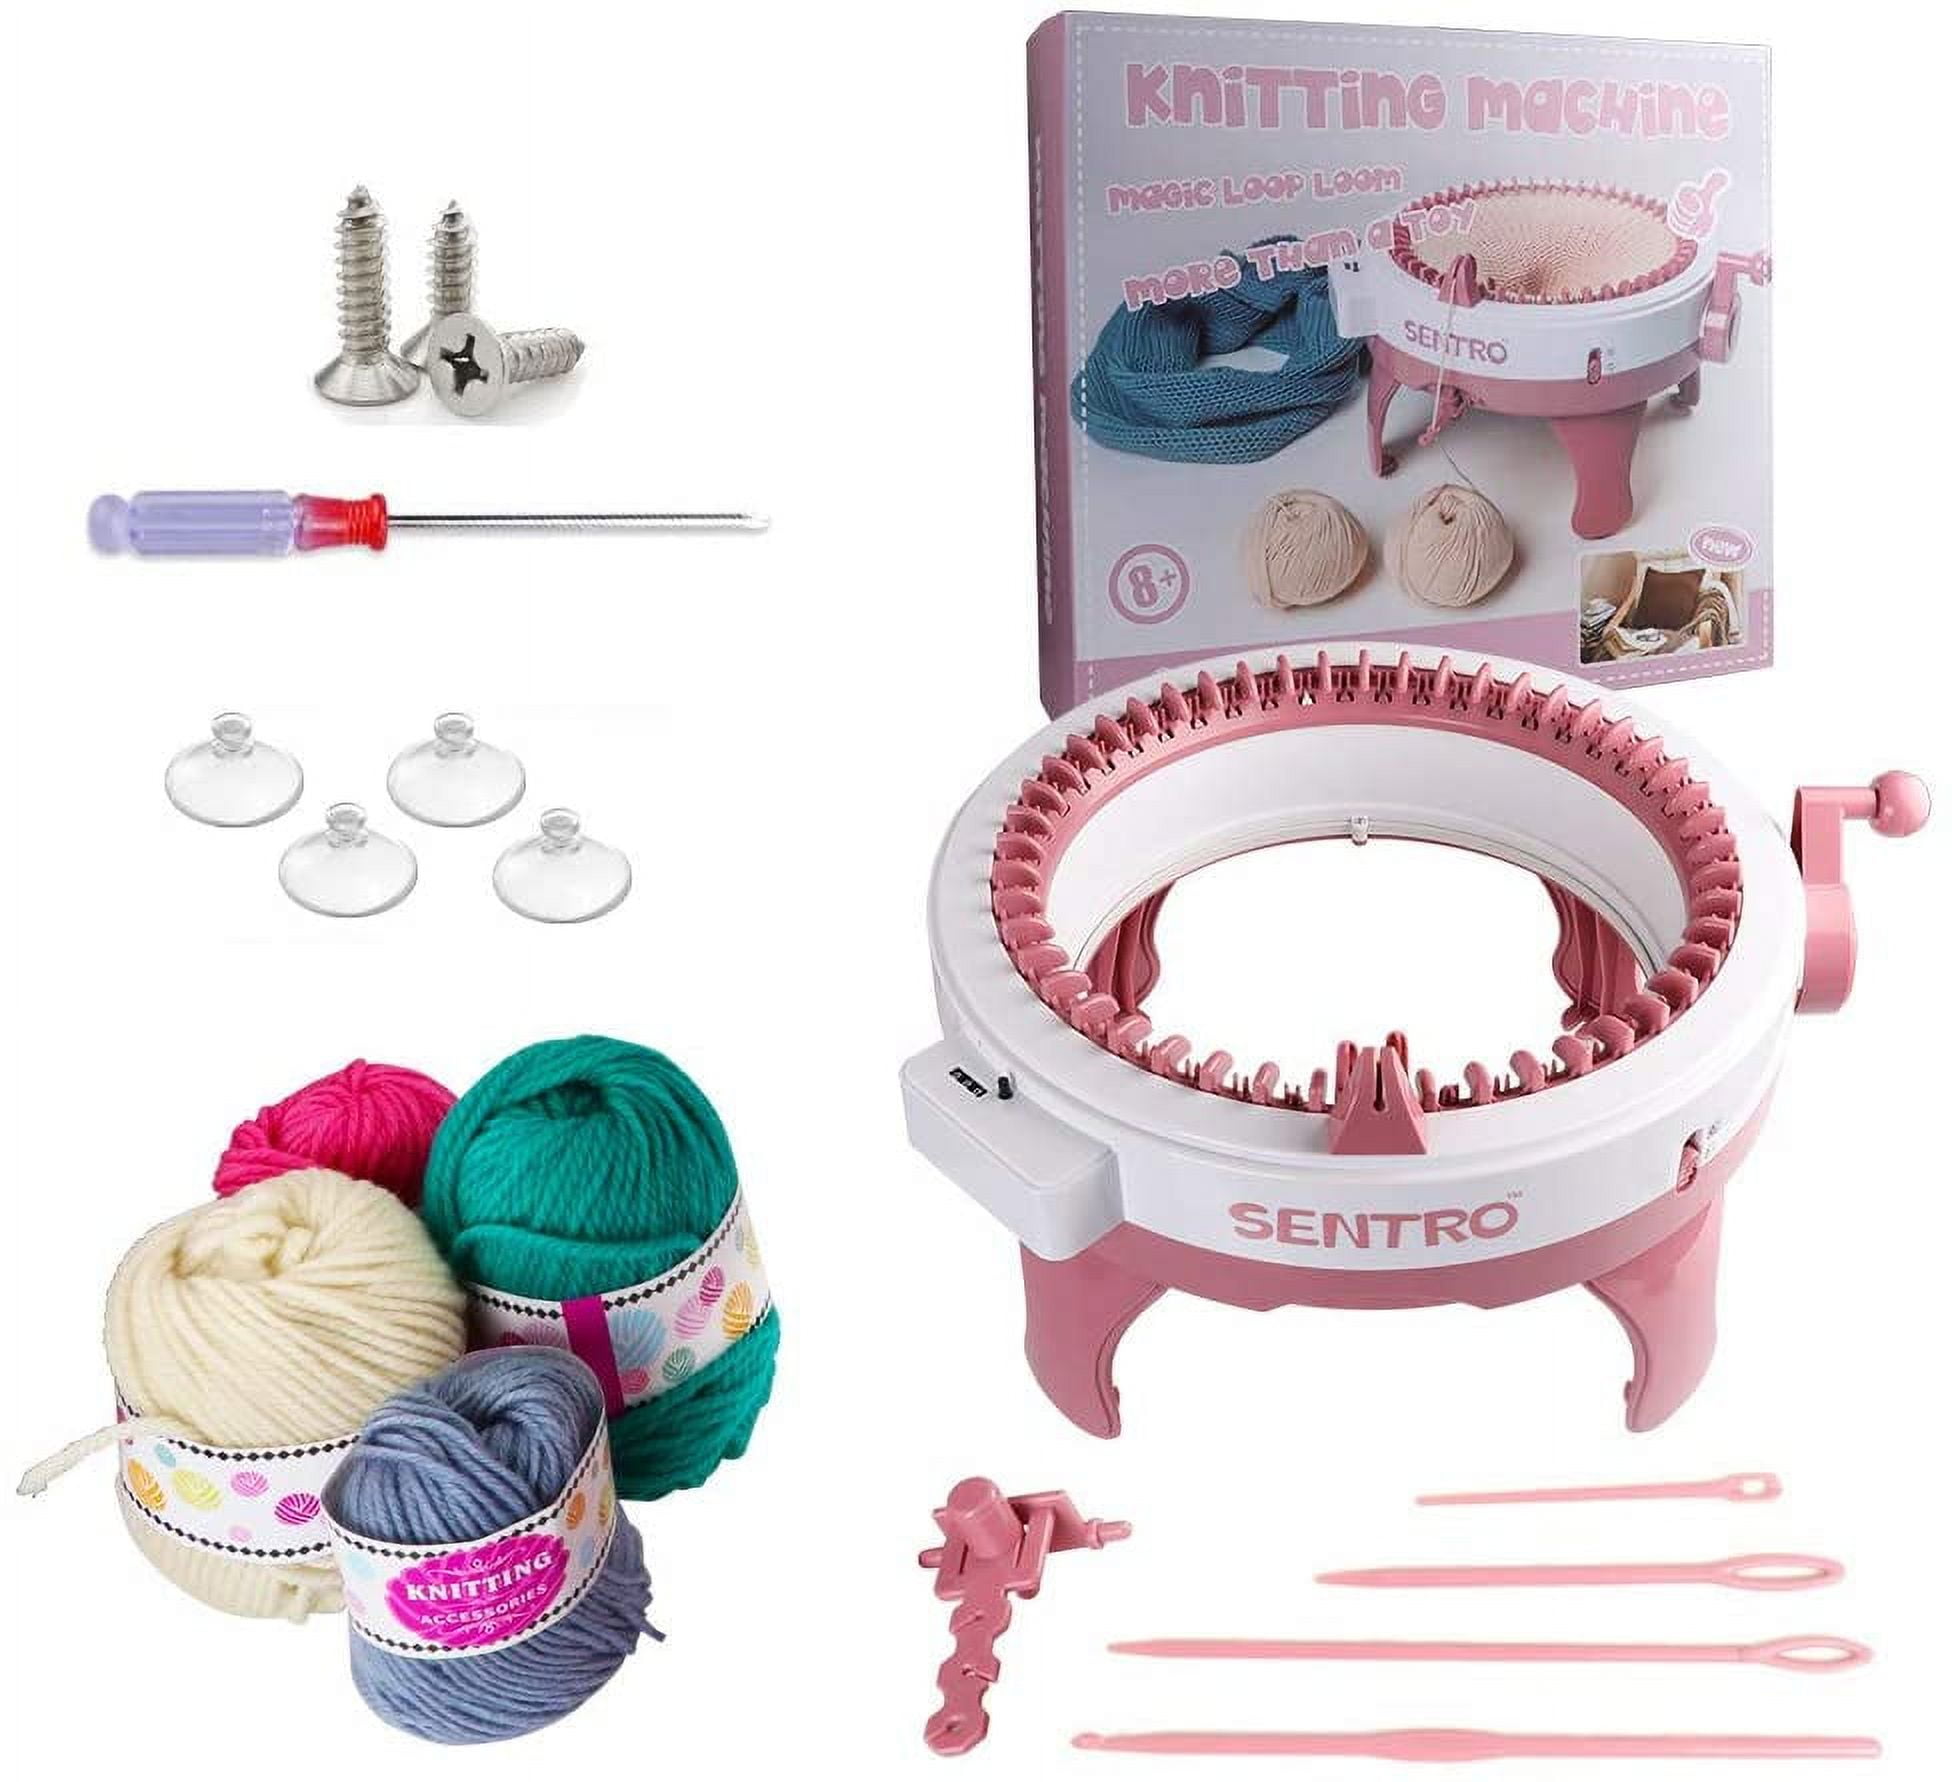  RVtiooy Knitting Machine, 48 Needles Knitting Machine, Smart  Loom with Row Counter, Knitting Machines for Adults and Kids DIY Scarf Hat  Socks Gloves, for Beginners(W48) : Arts, Crafts & Sewing